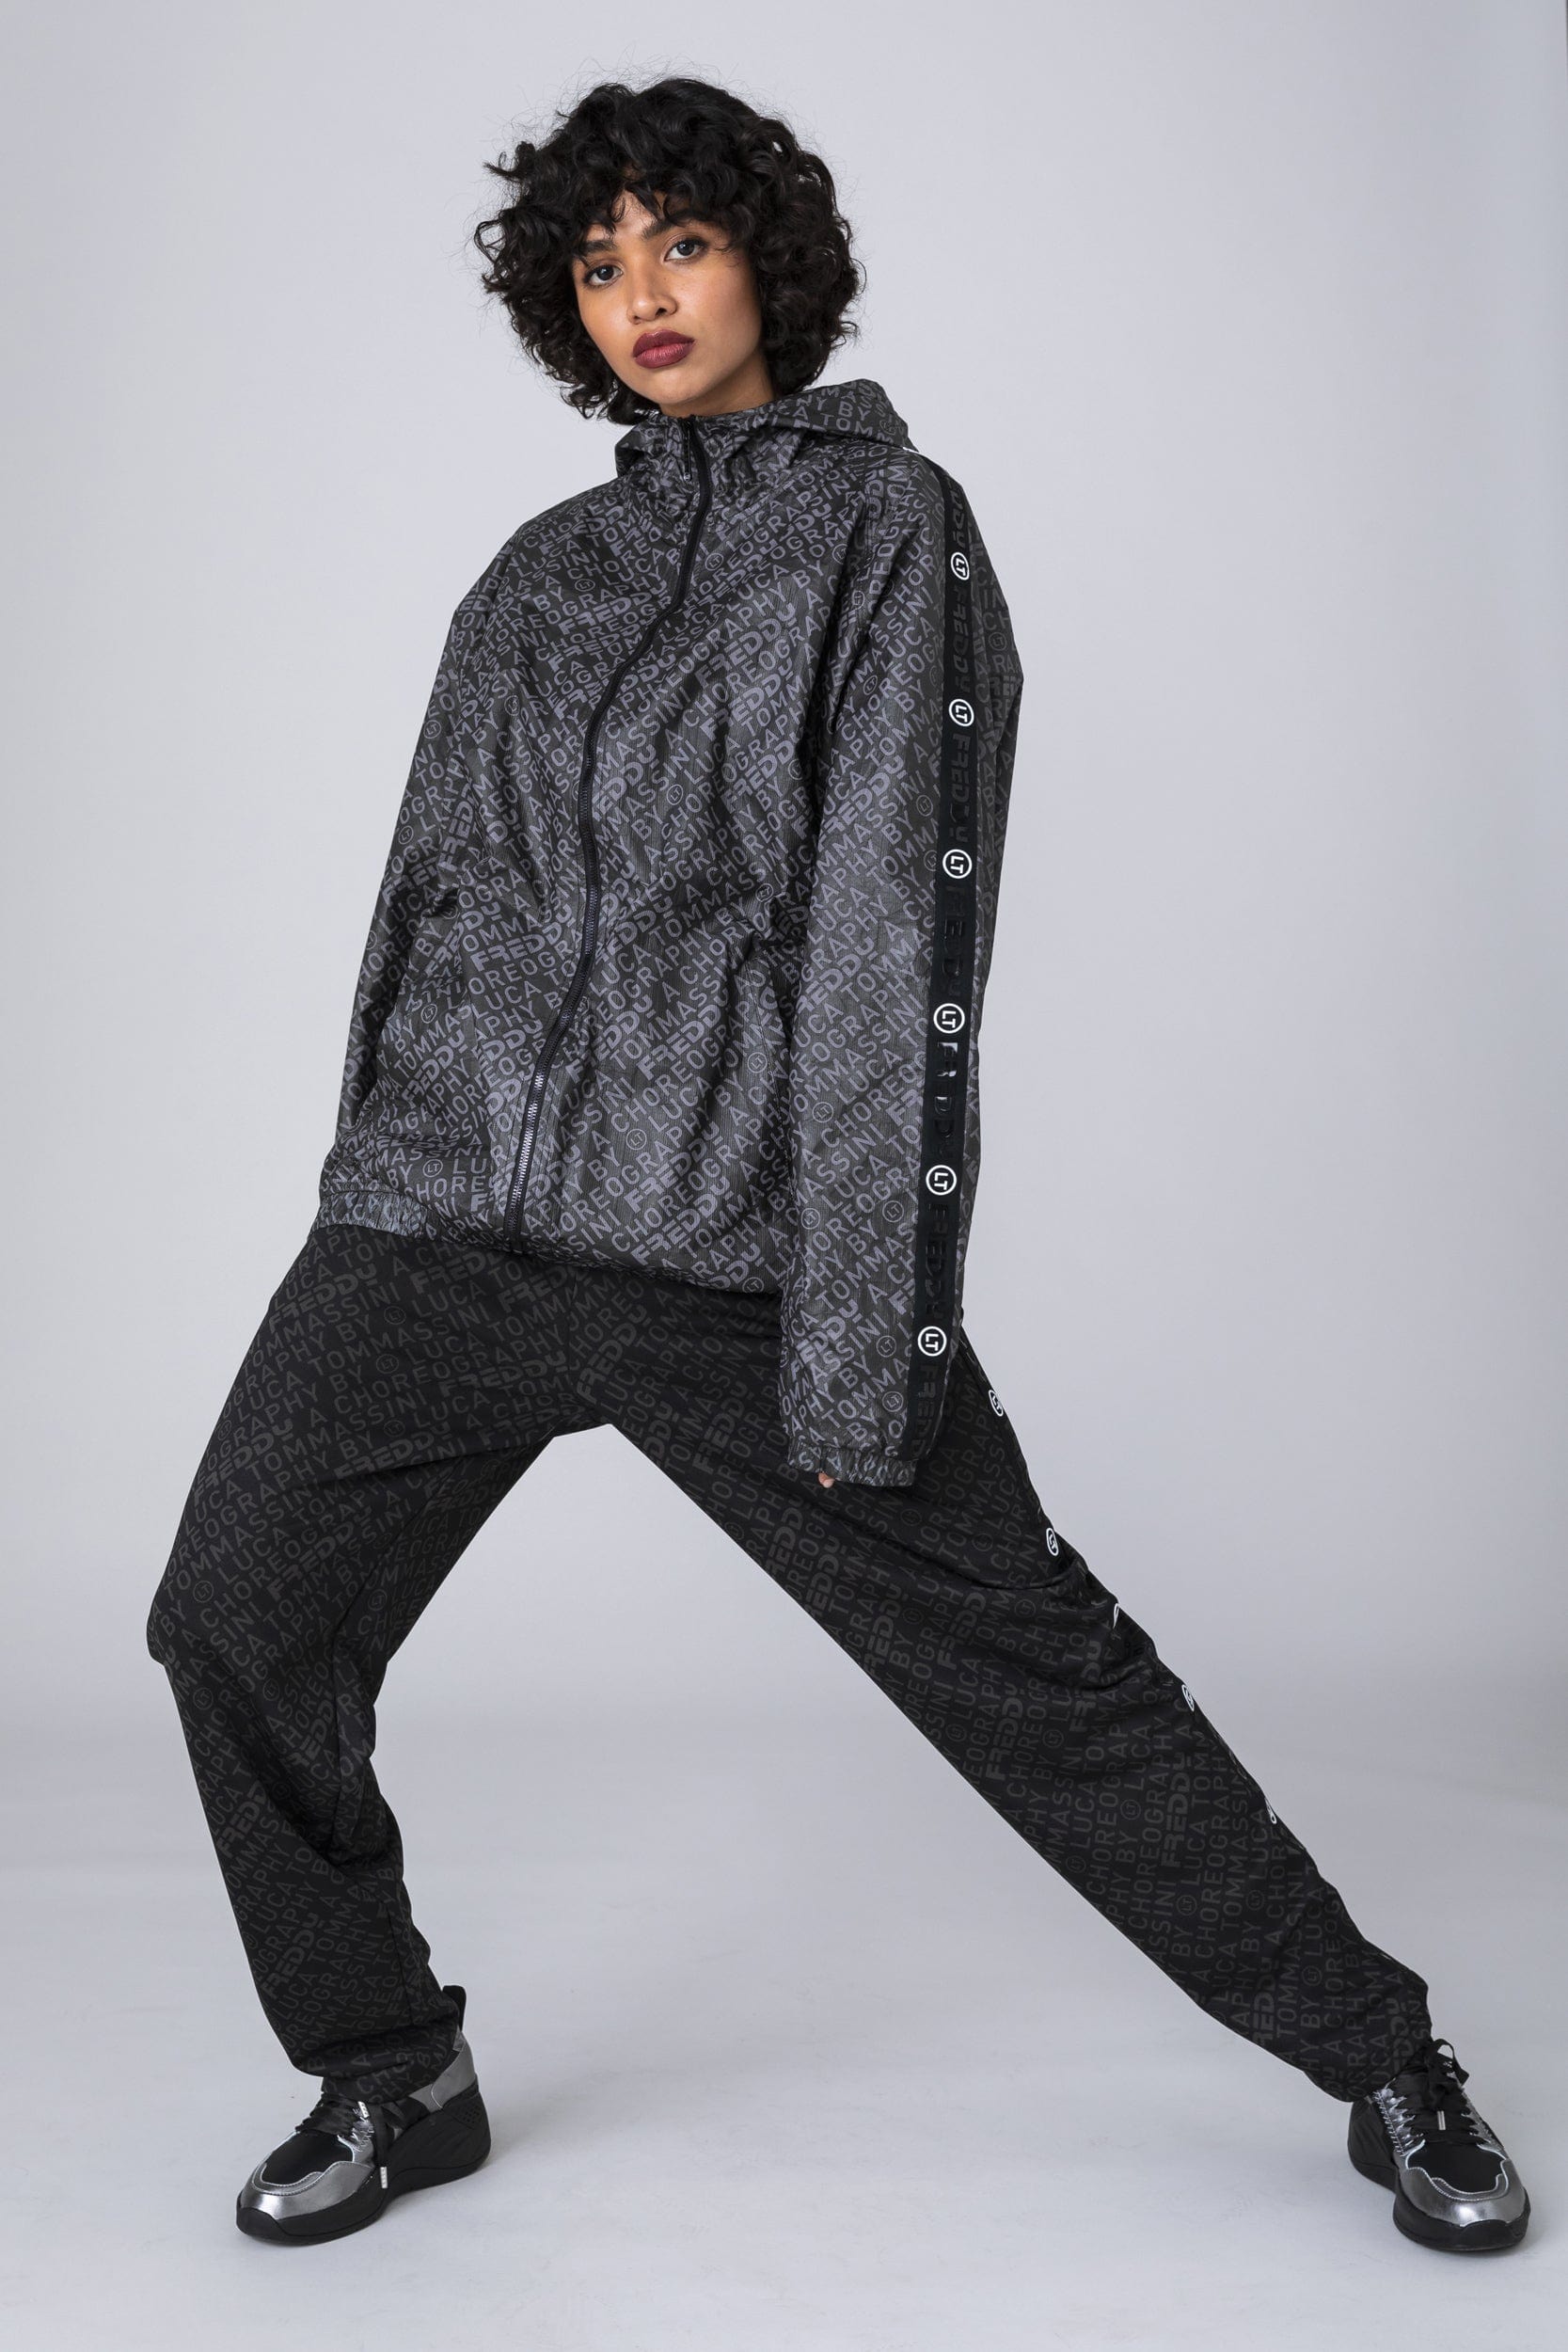 Graphic trousers unisex - A Choreography by Luca Tommassini 1